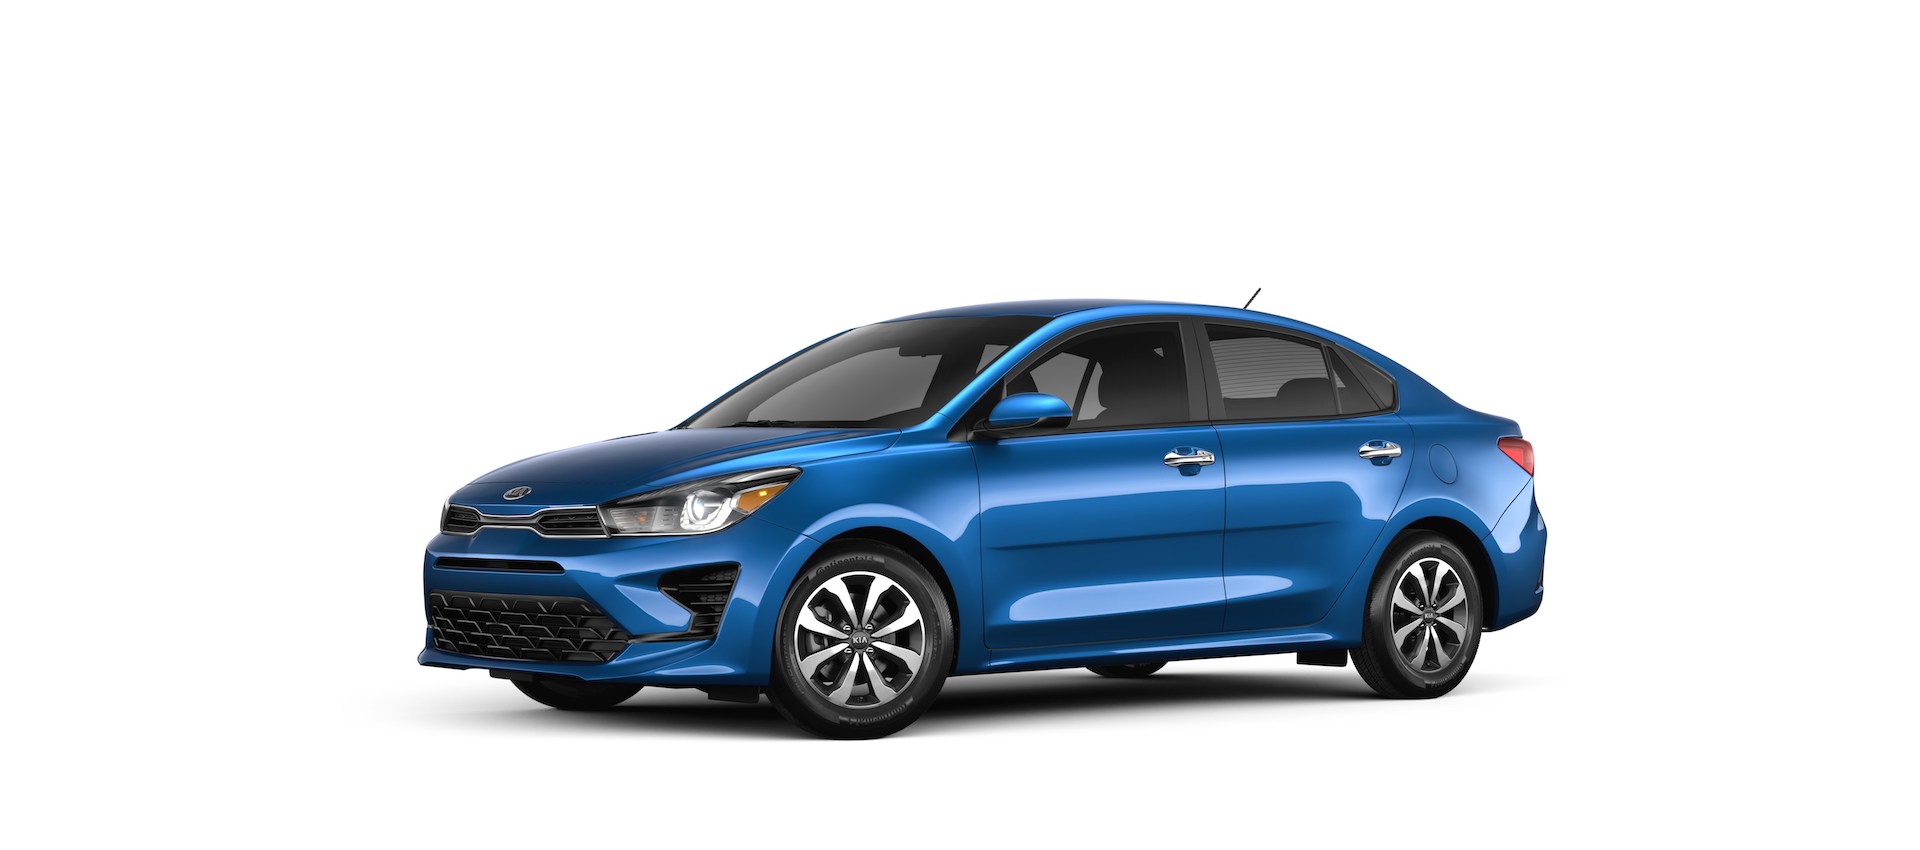 New and Used Kia Rio Prices, Photos, Reviews, Specs The